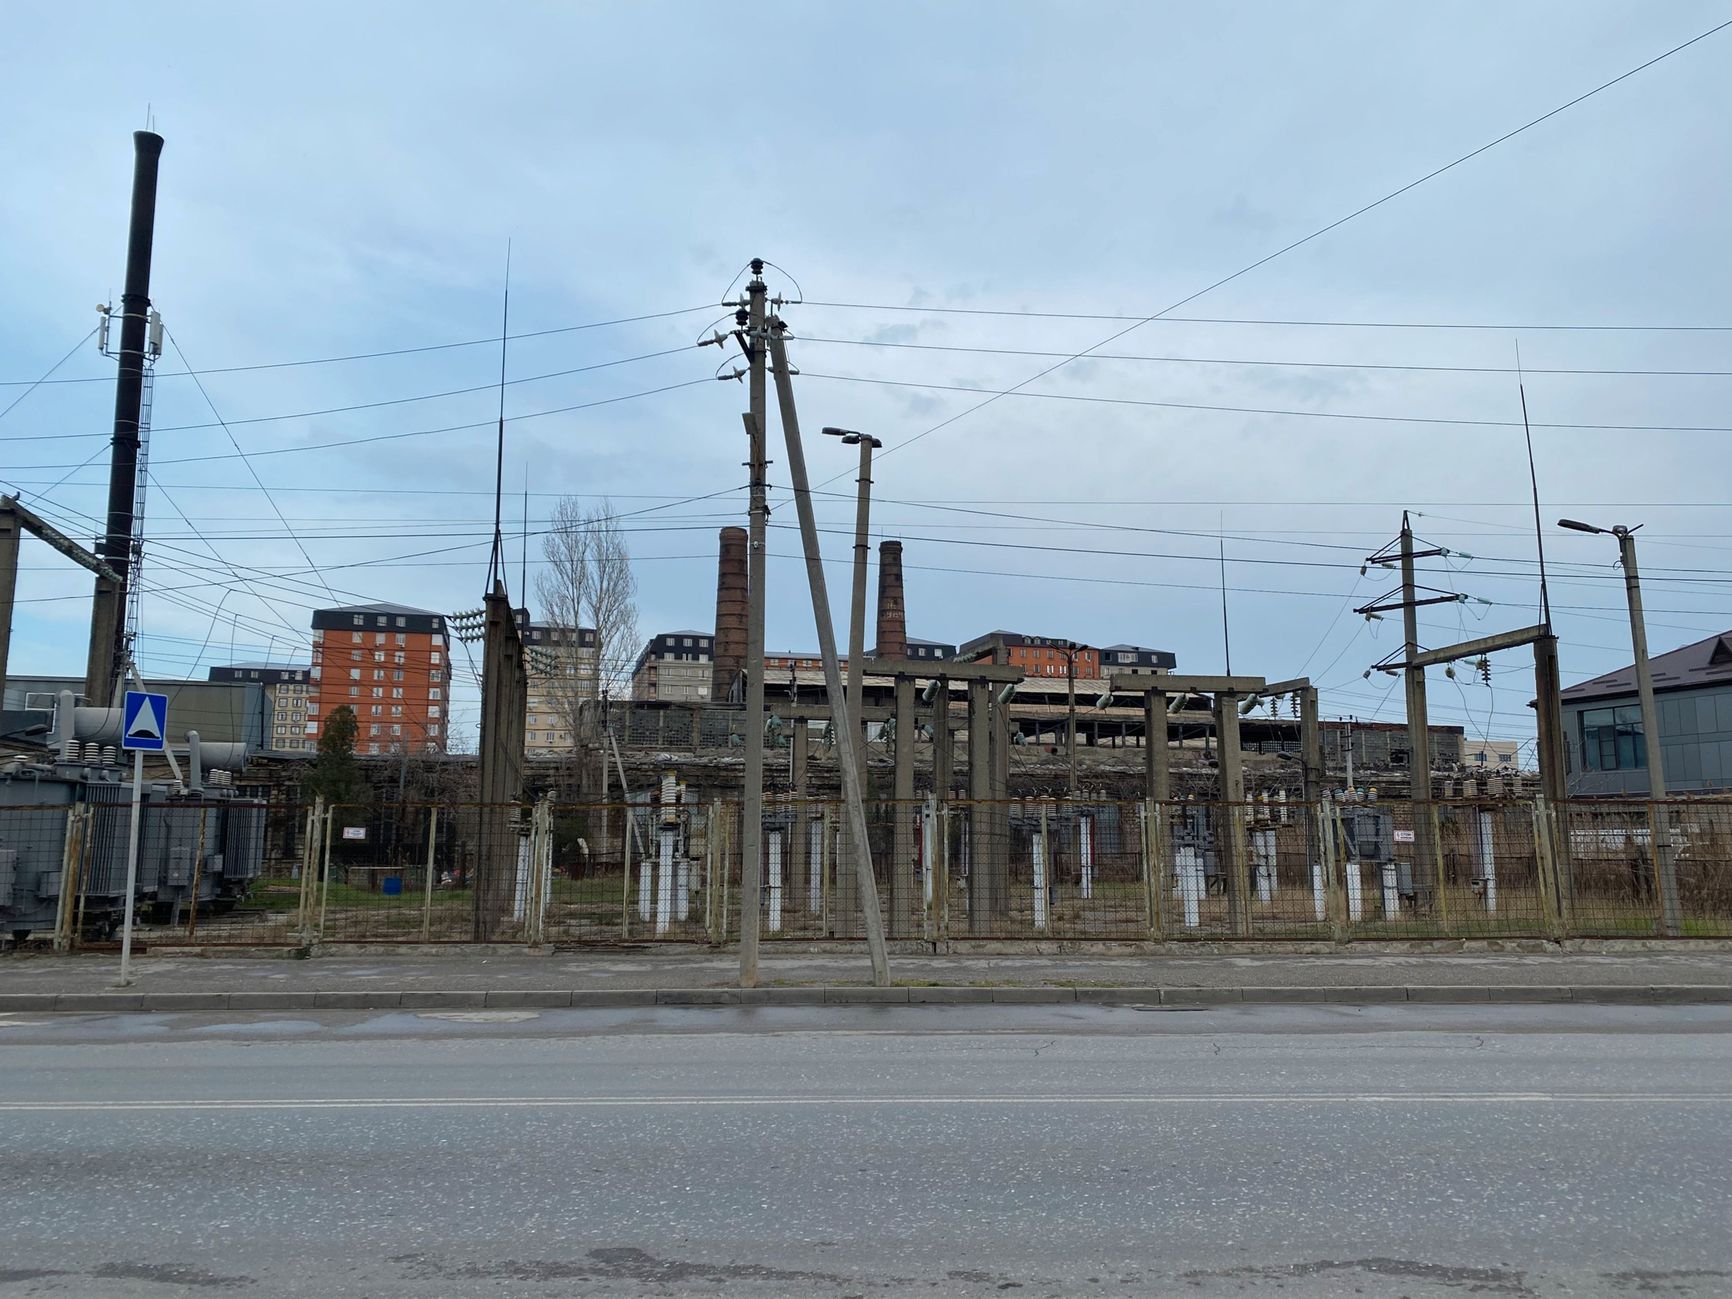 A transformer substation in Reduktorny near Makhachkala. Locals blame the frequent blackouts on dilapidated power systems and equipment — and on crypto miners